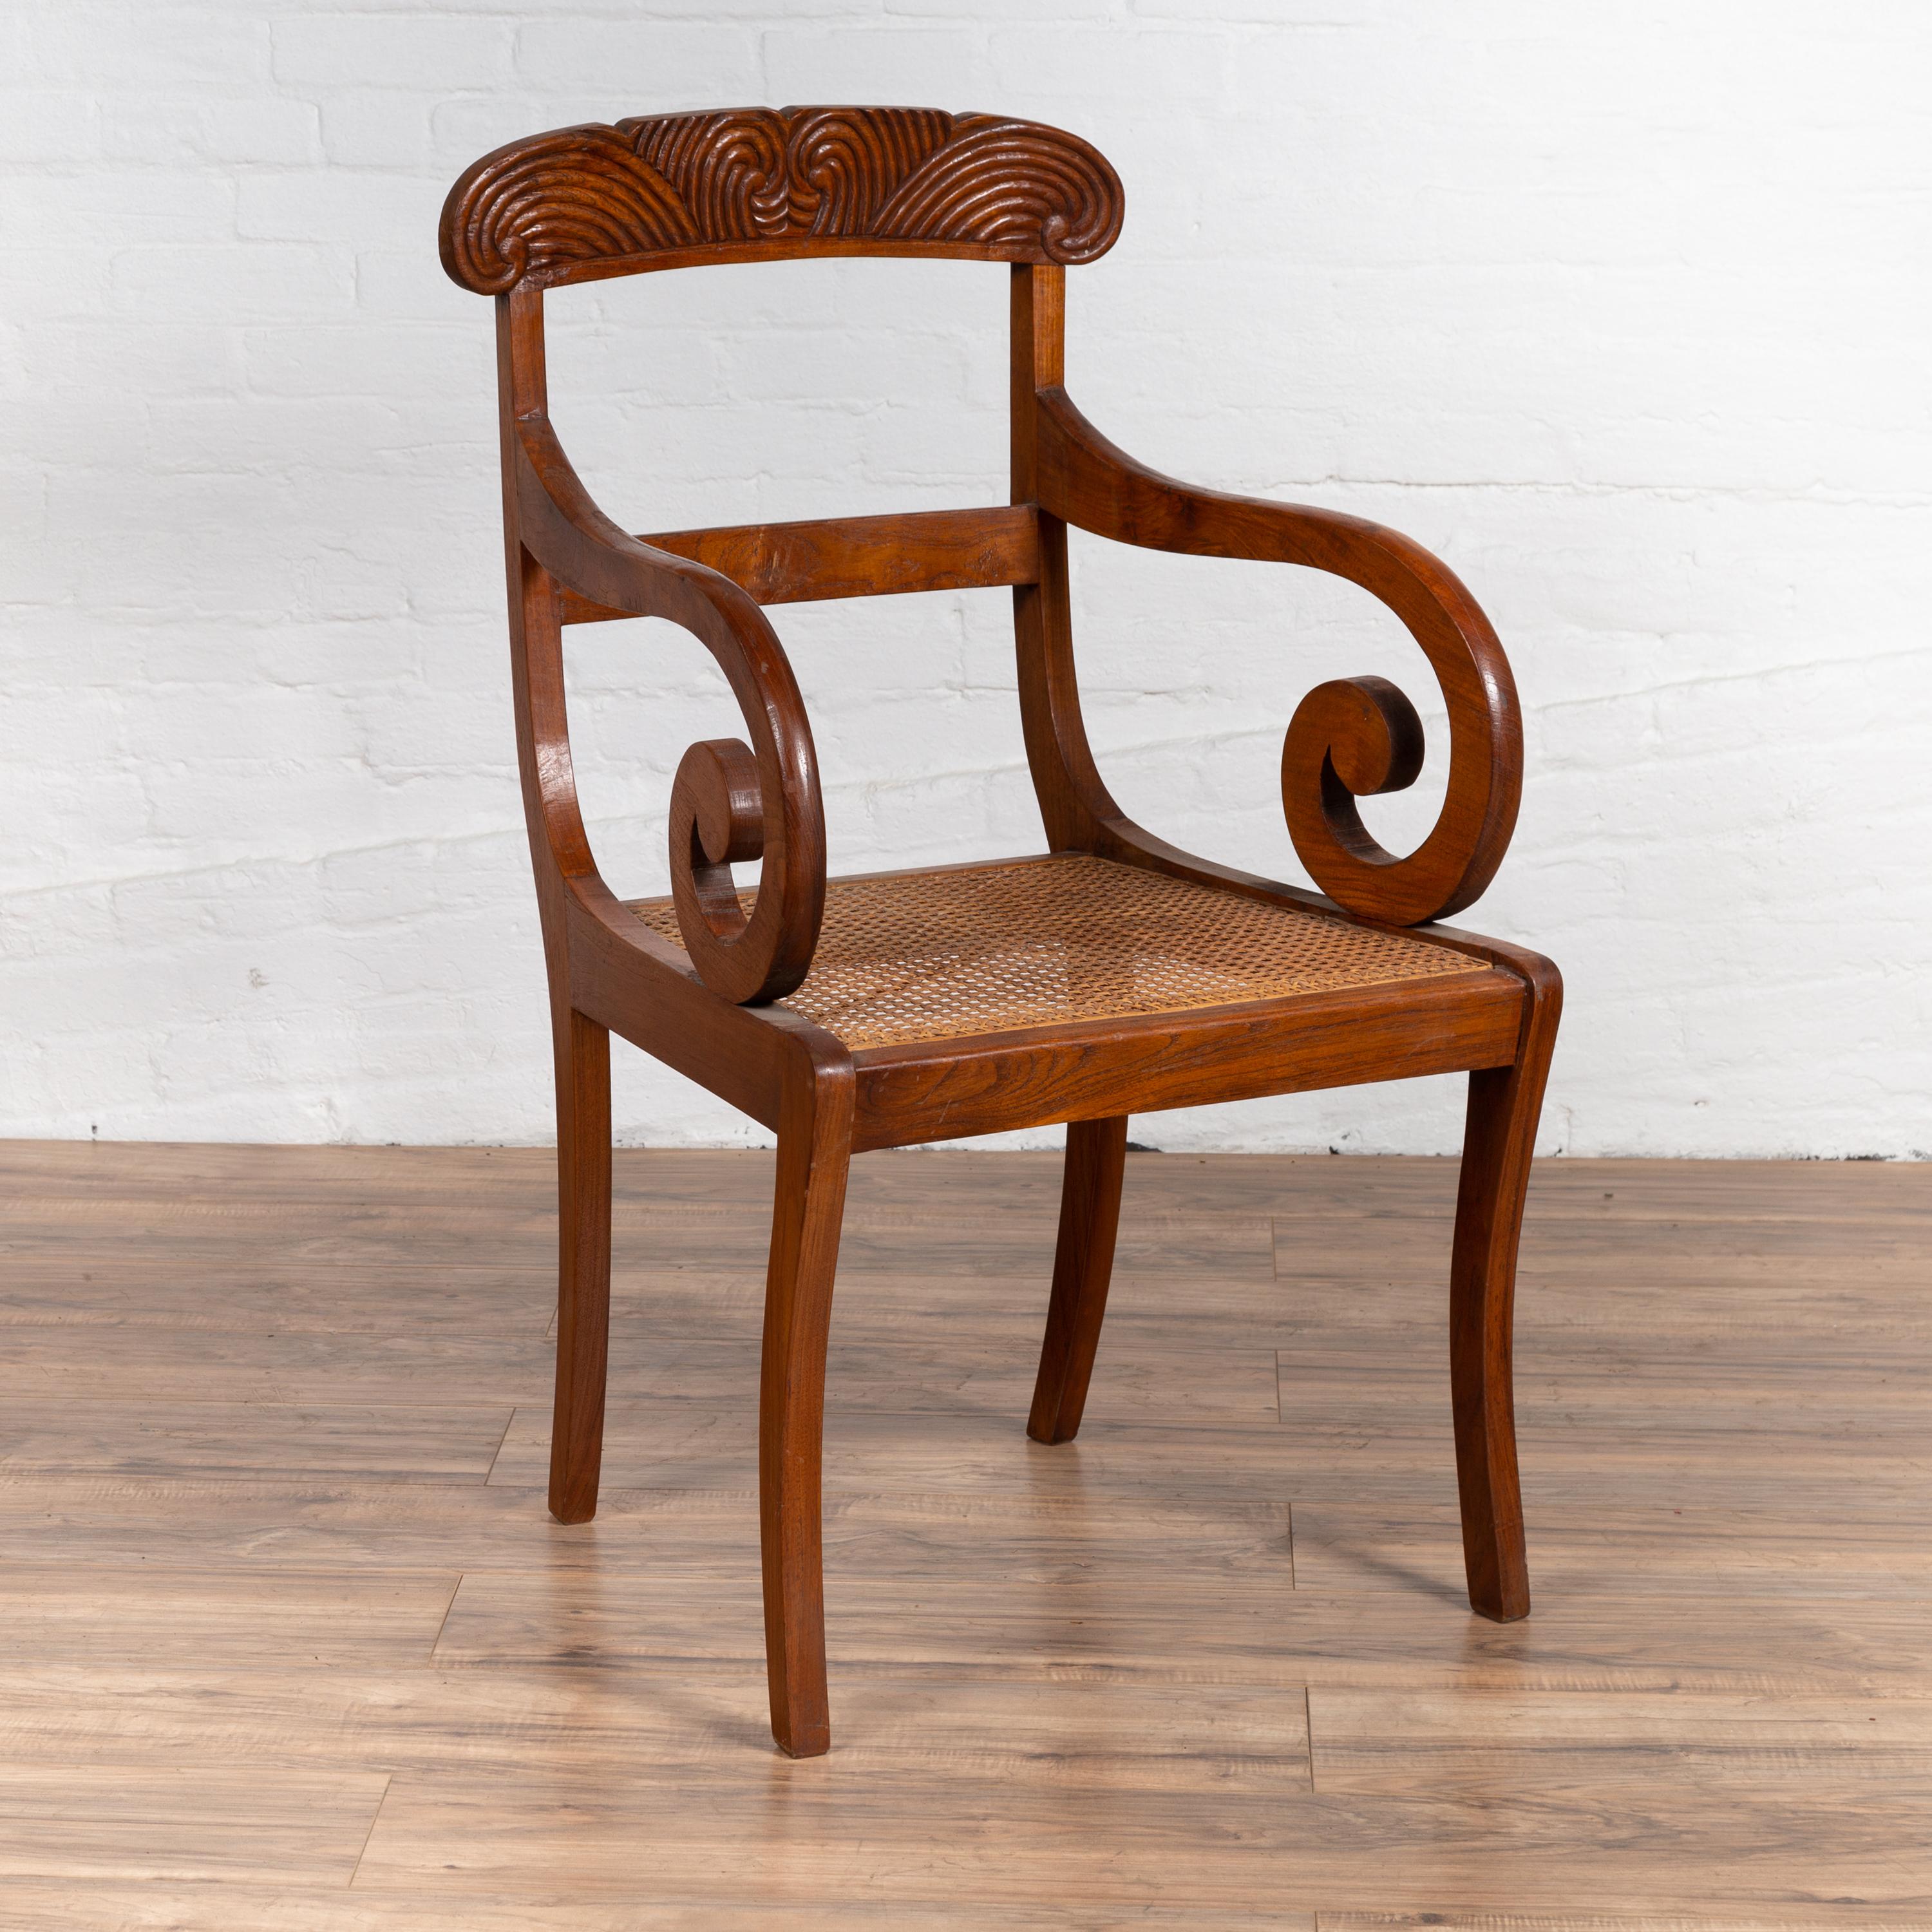 An antique Javanese wooden armchair from the early 20th century with carved back, curving arms and woven rattan seat. We have a near pair available, please view our other chair LU863915598432 as well as image #3 that shows both of them together